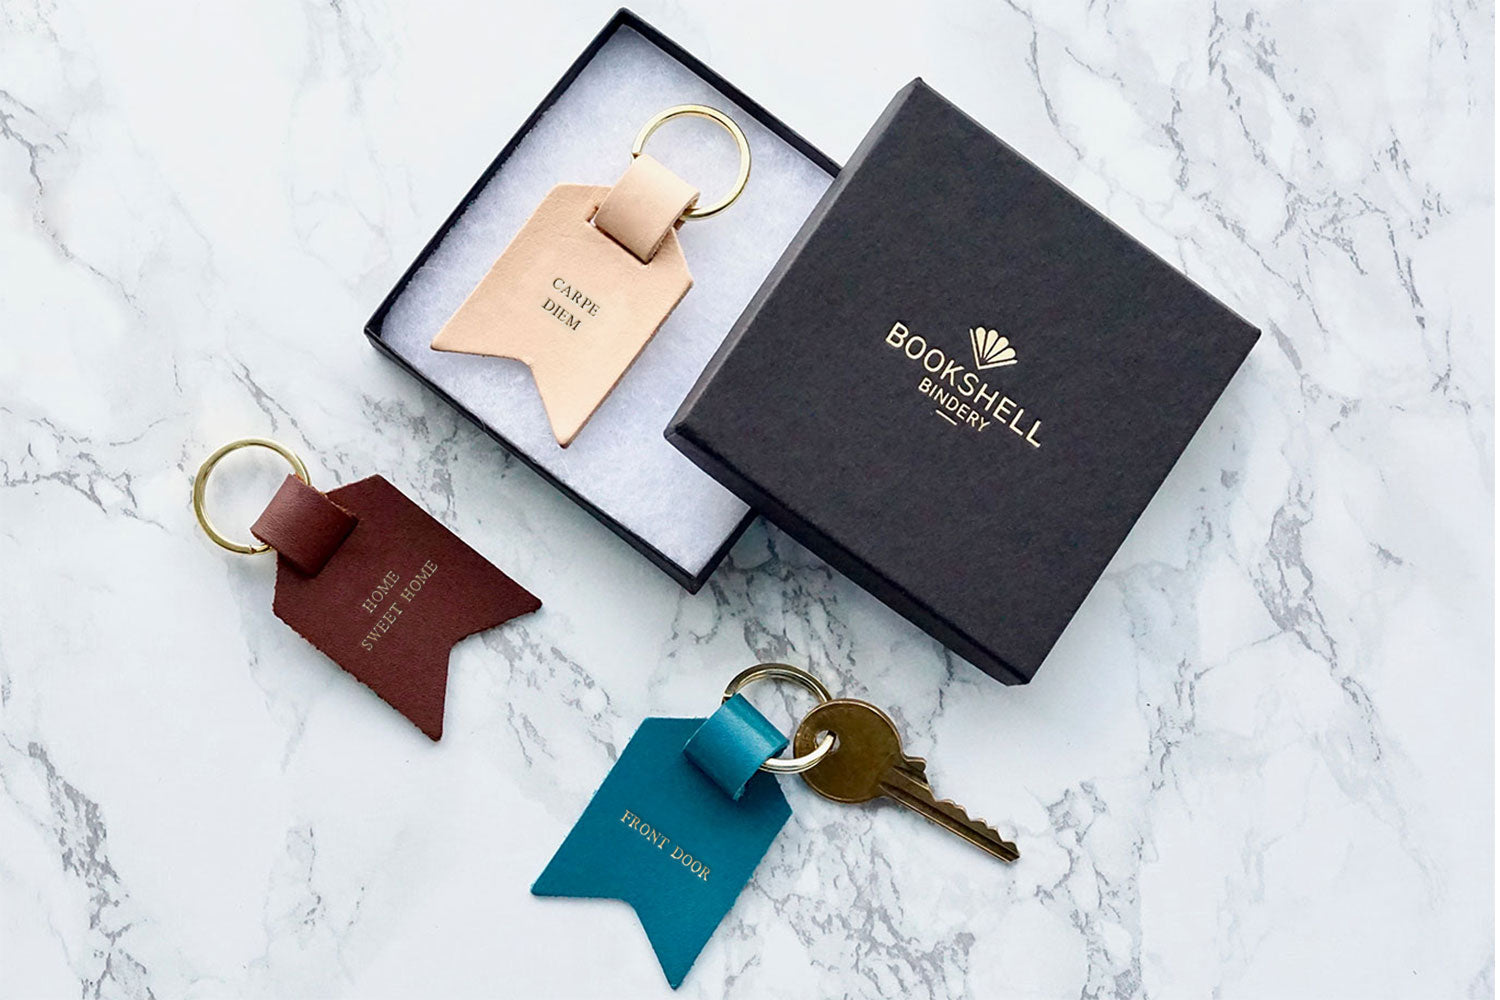 Mum keychain from Bookshell Bindery ready to gift in beautiful packaging